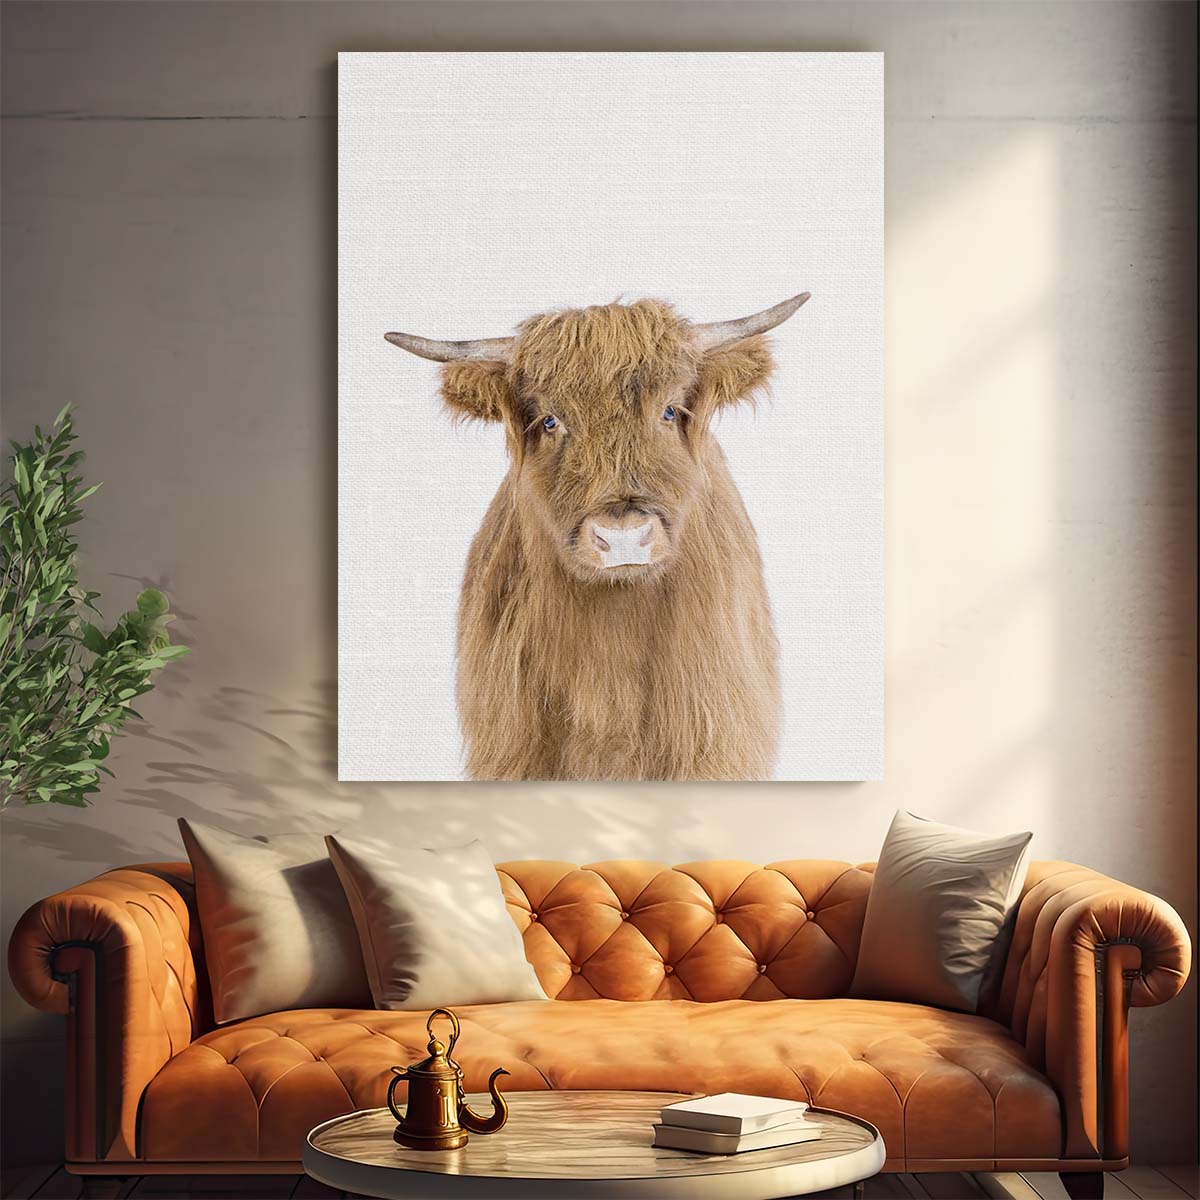 Pastoral Baby Cow Portrait, Rural Farmhouse Wall Art by Luxuriance Designs, made in USA